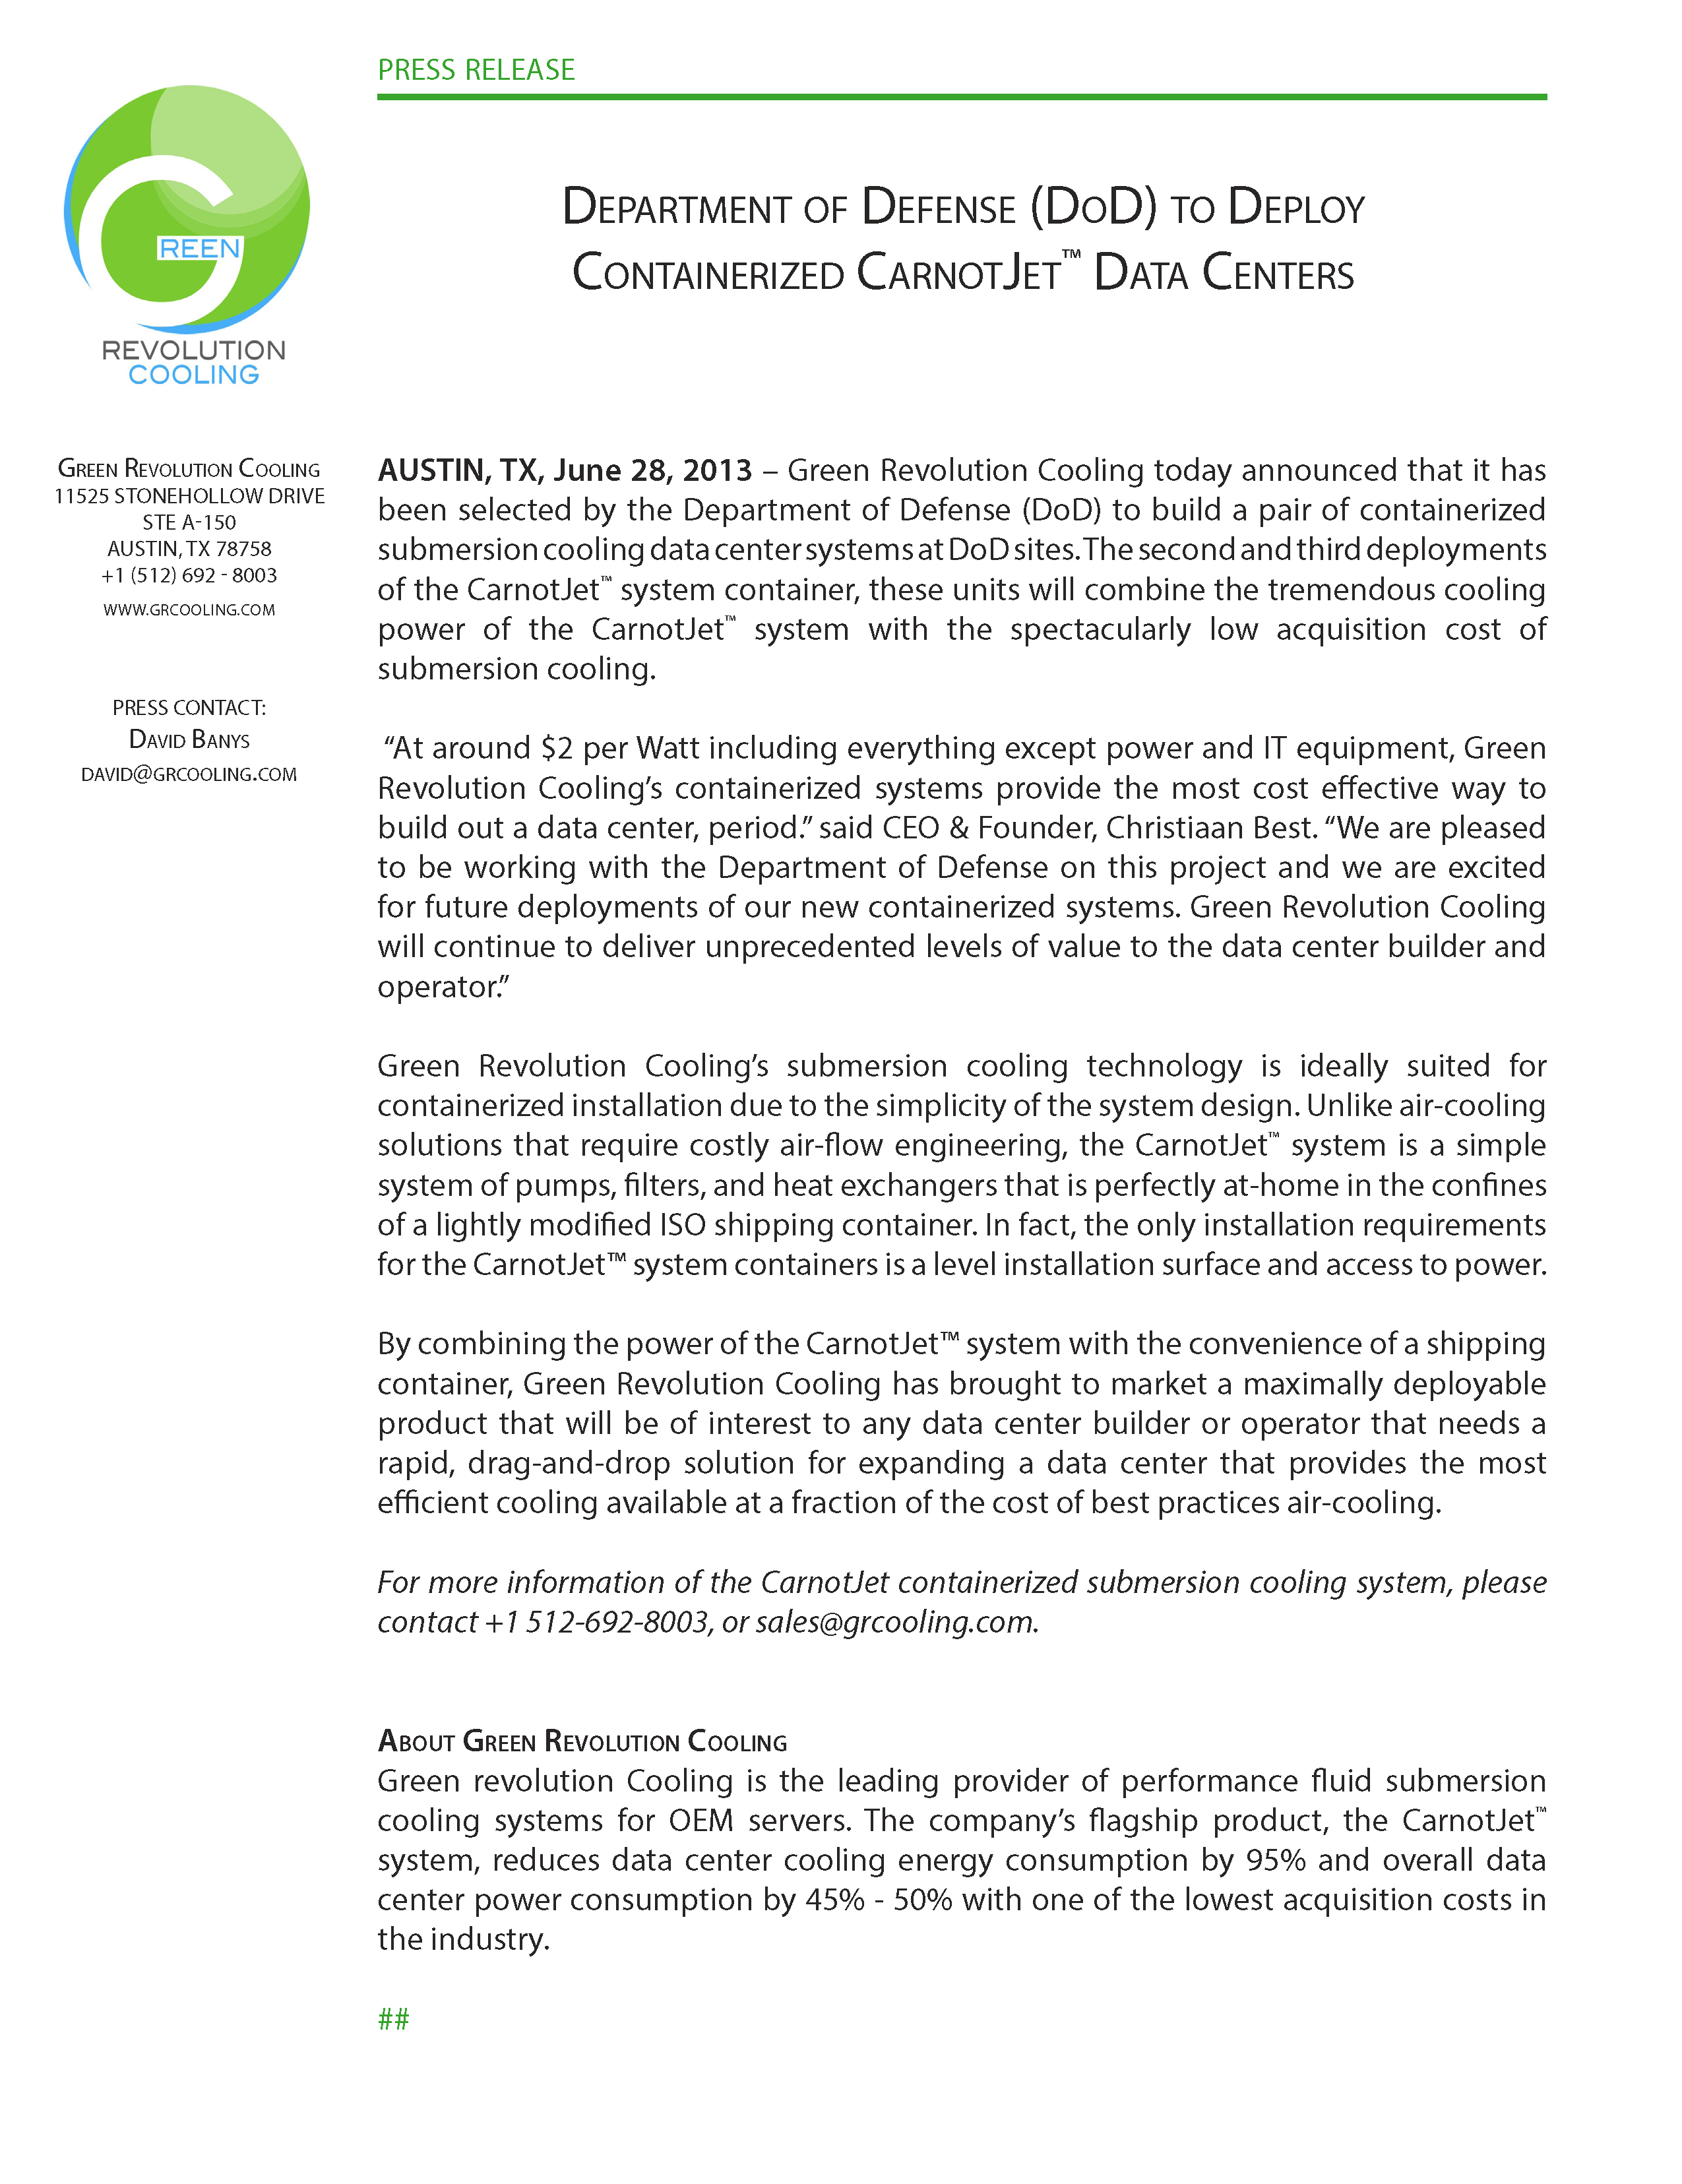 Department of Defense (DoD) to Deploy Containerized CarnotJet Data Centers